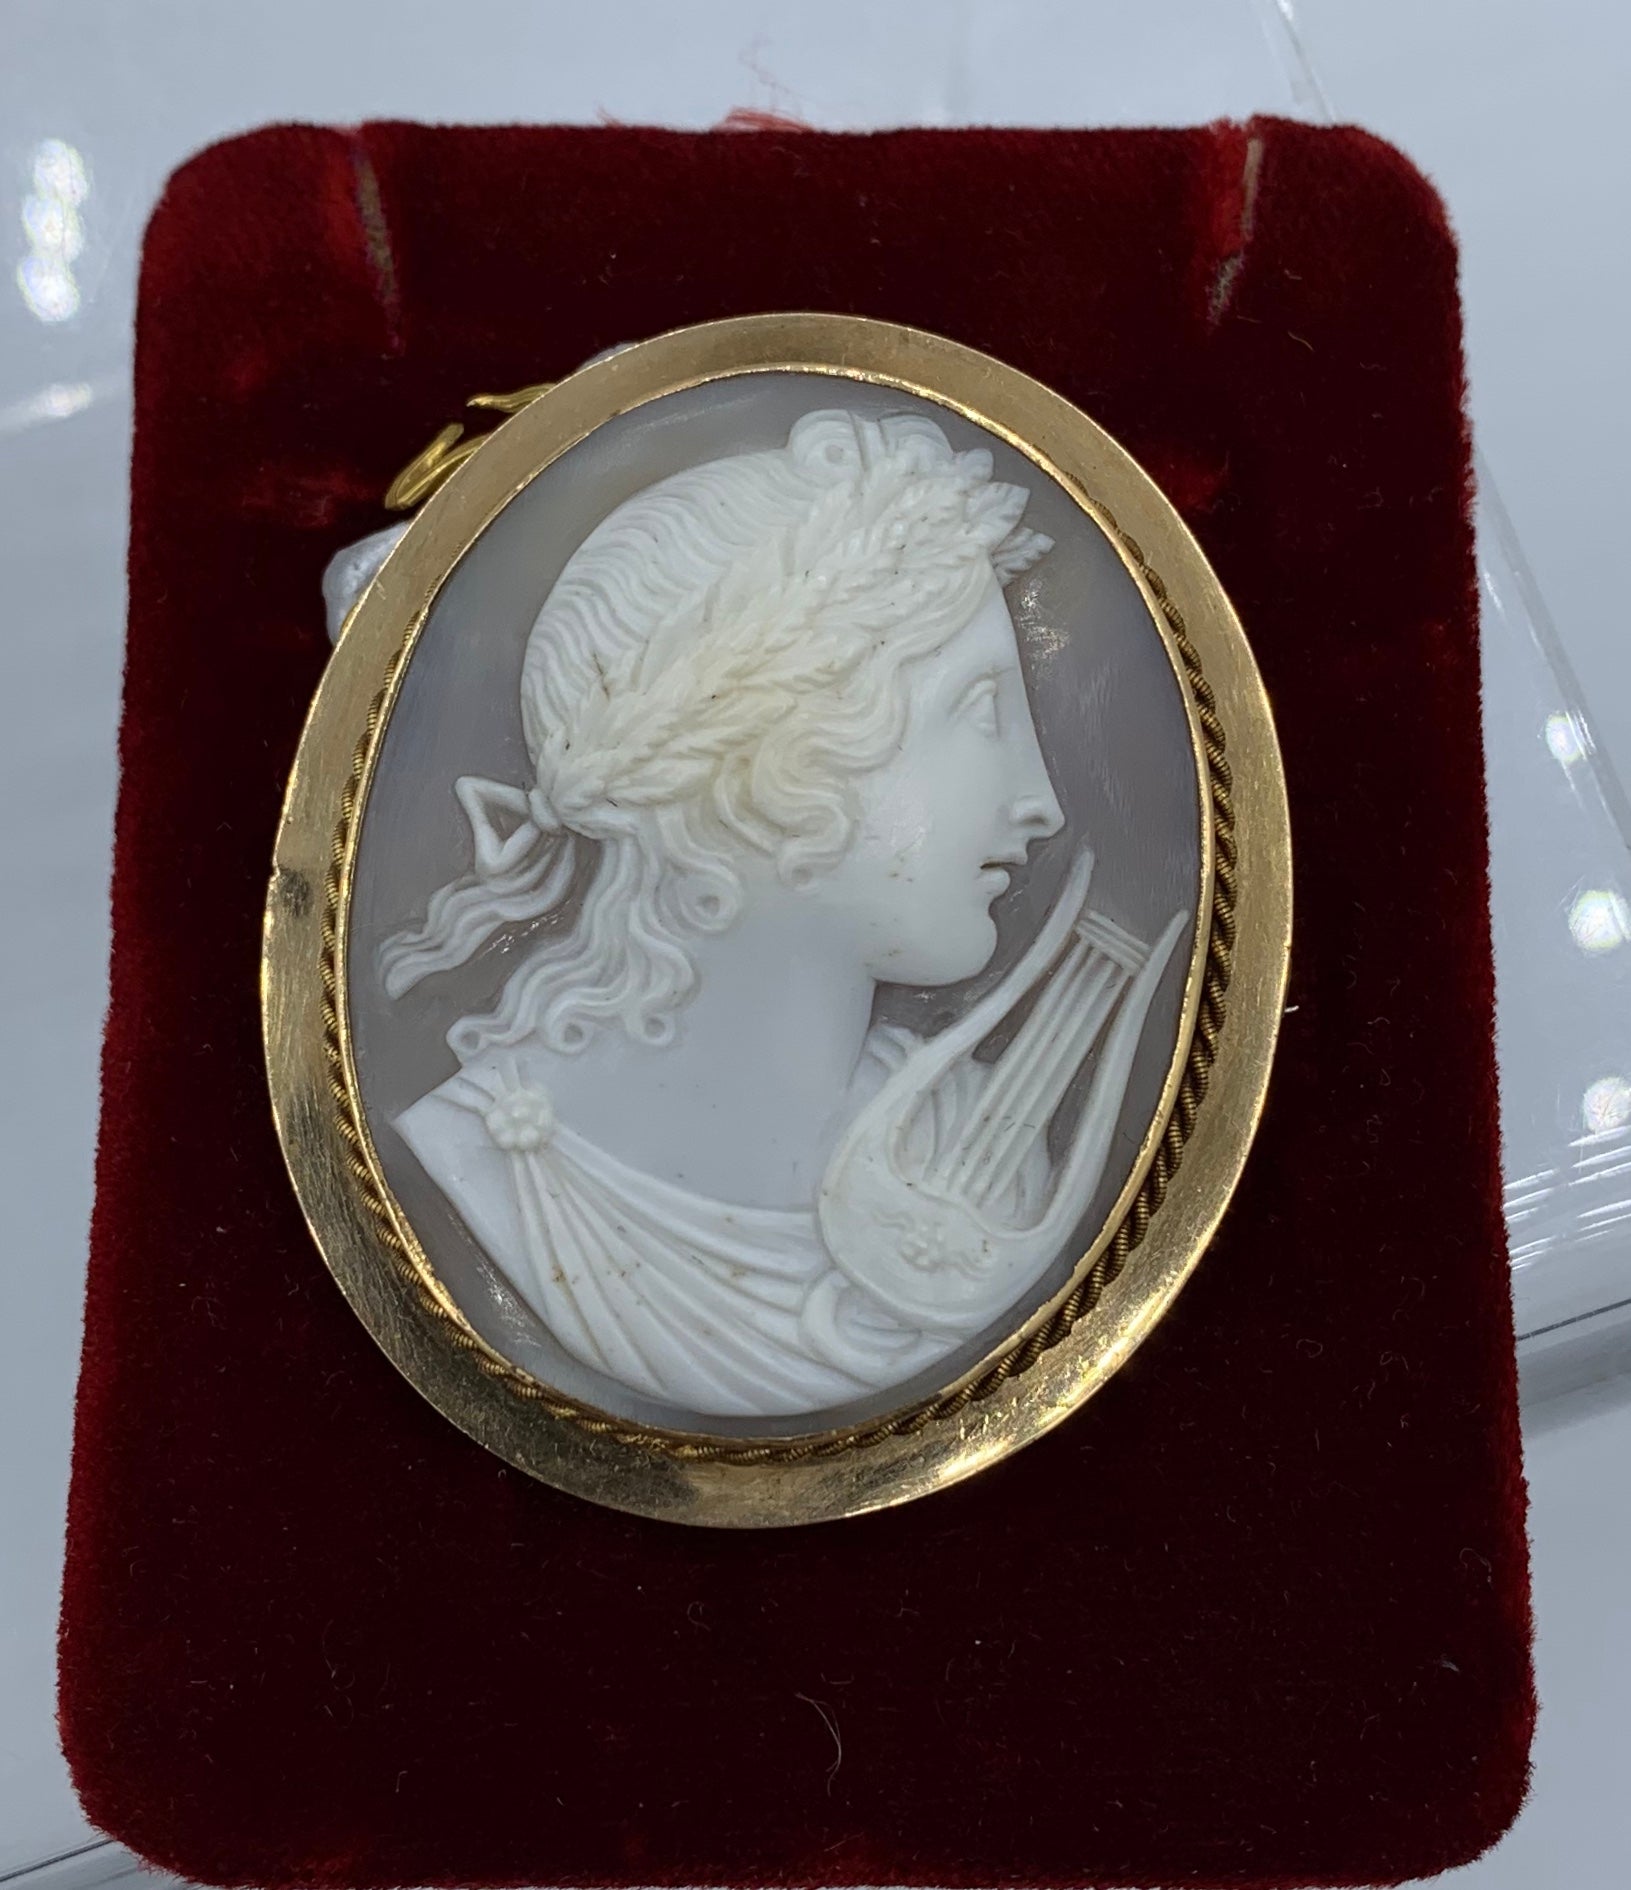 This is an absolutely stunning large size antique Victorian - Belle Epoque Shell Cameo Brooch Pin with a high relief carving of a neoclassical image of the God Apollo with a lyre instrument and a laurel wreath in his hair.  The cameo is of